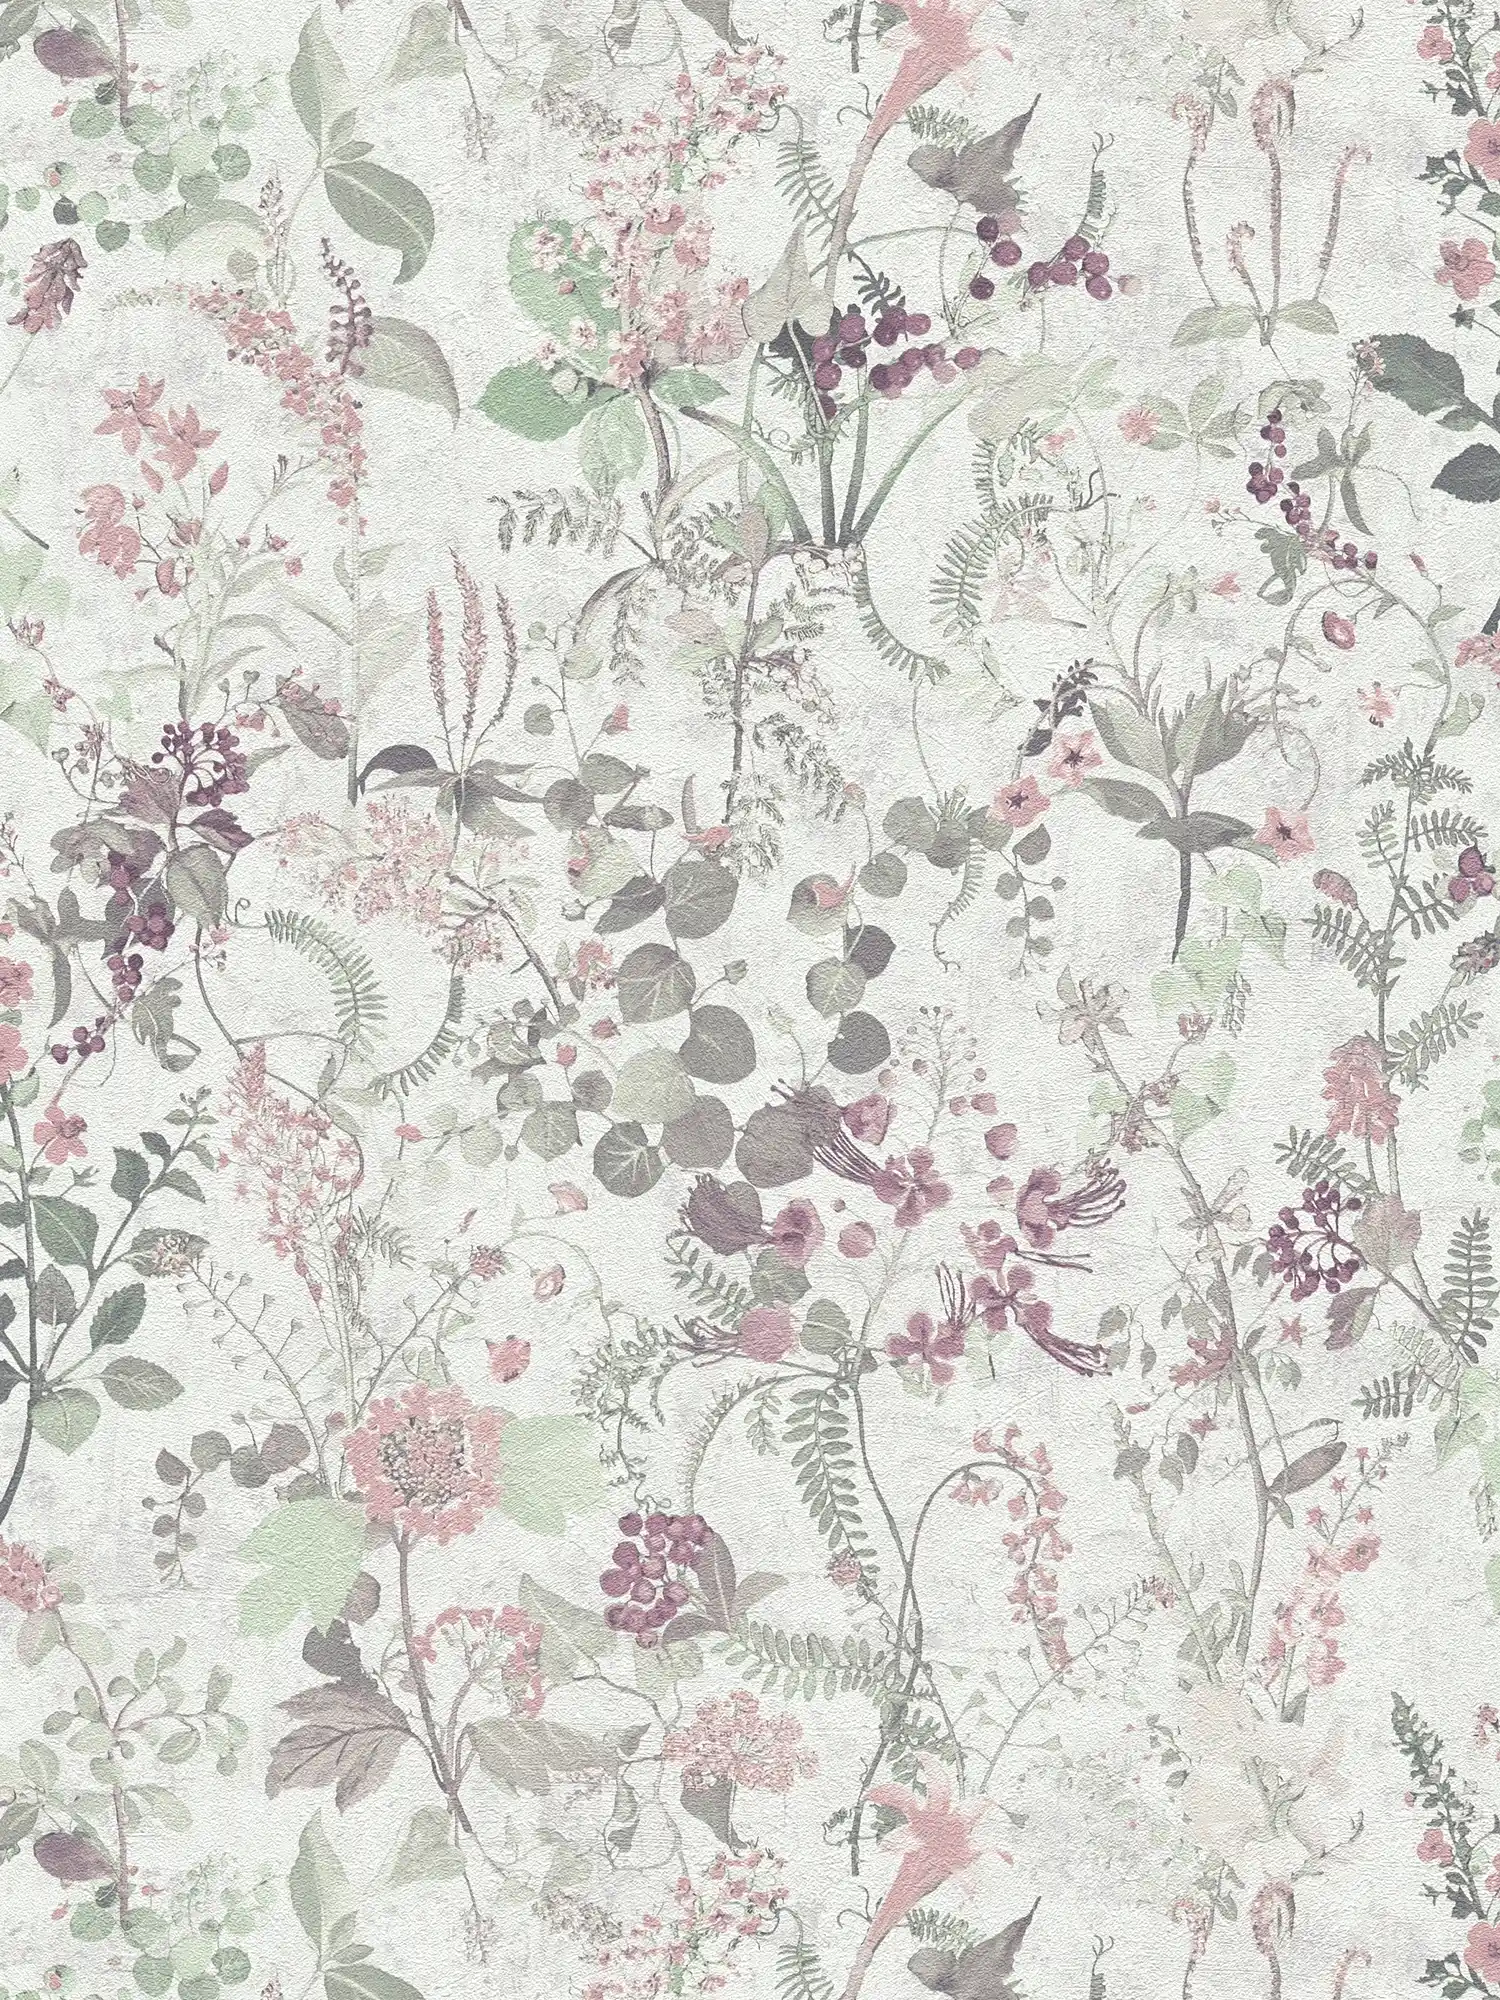         Nature wallpaper with floral pattern - grey, green, pink
    